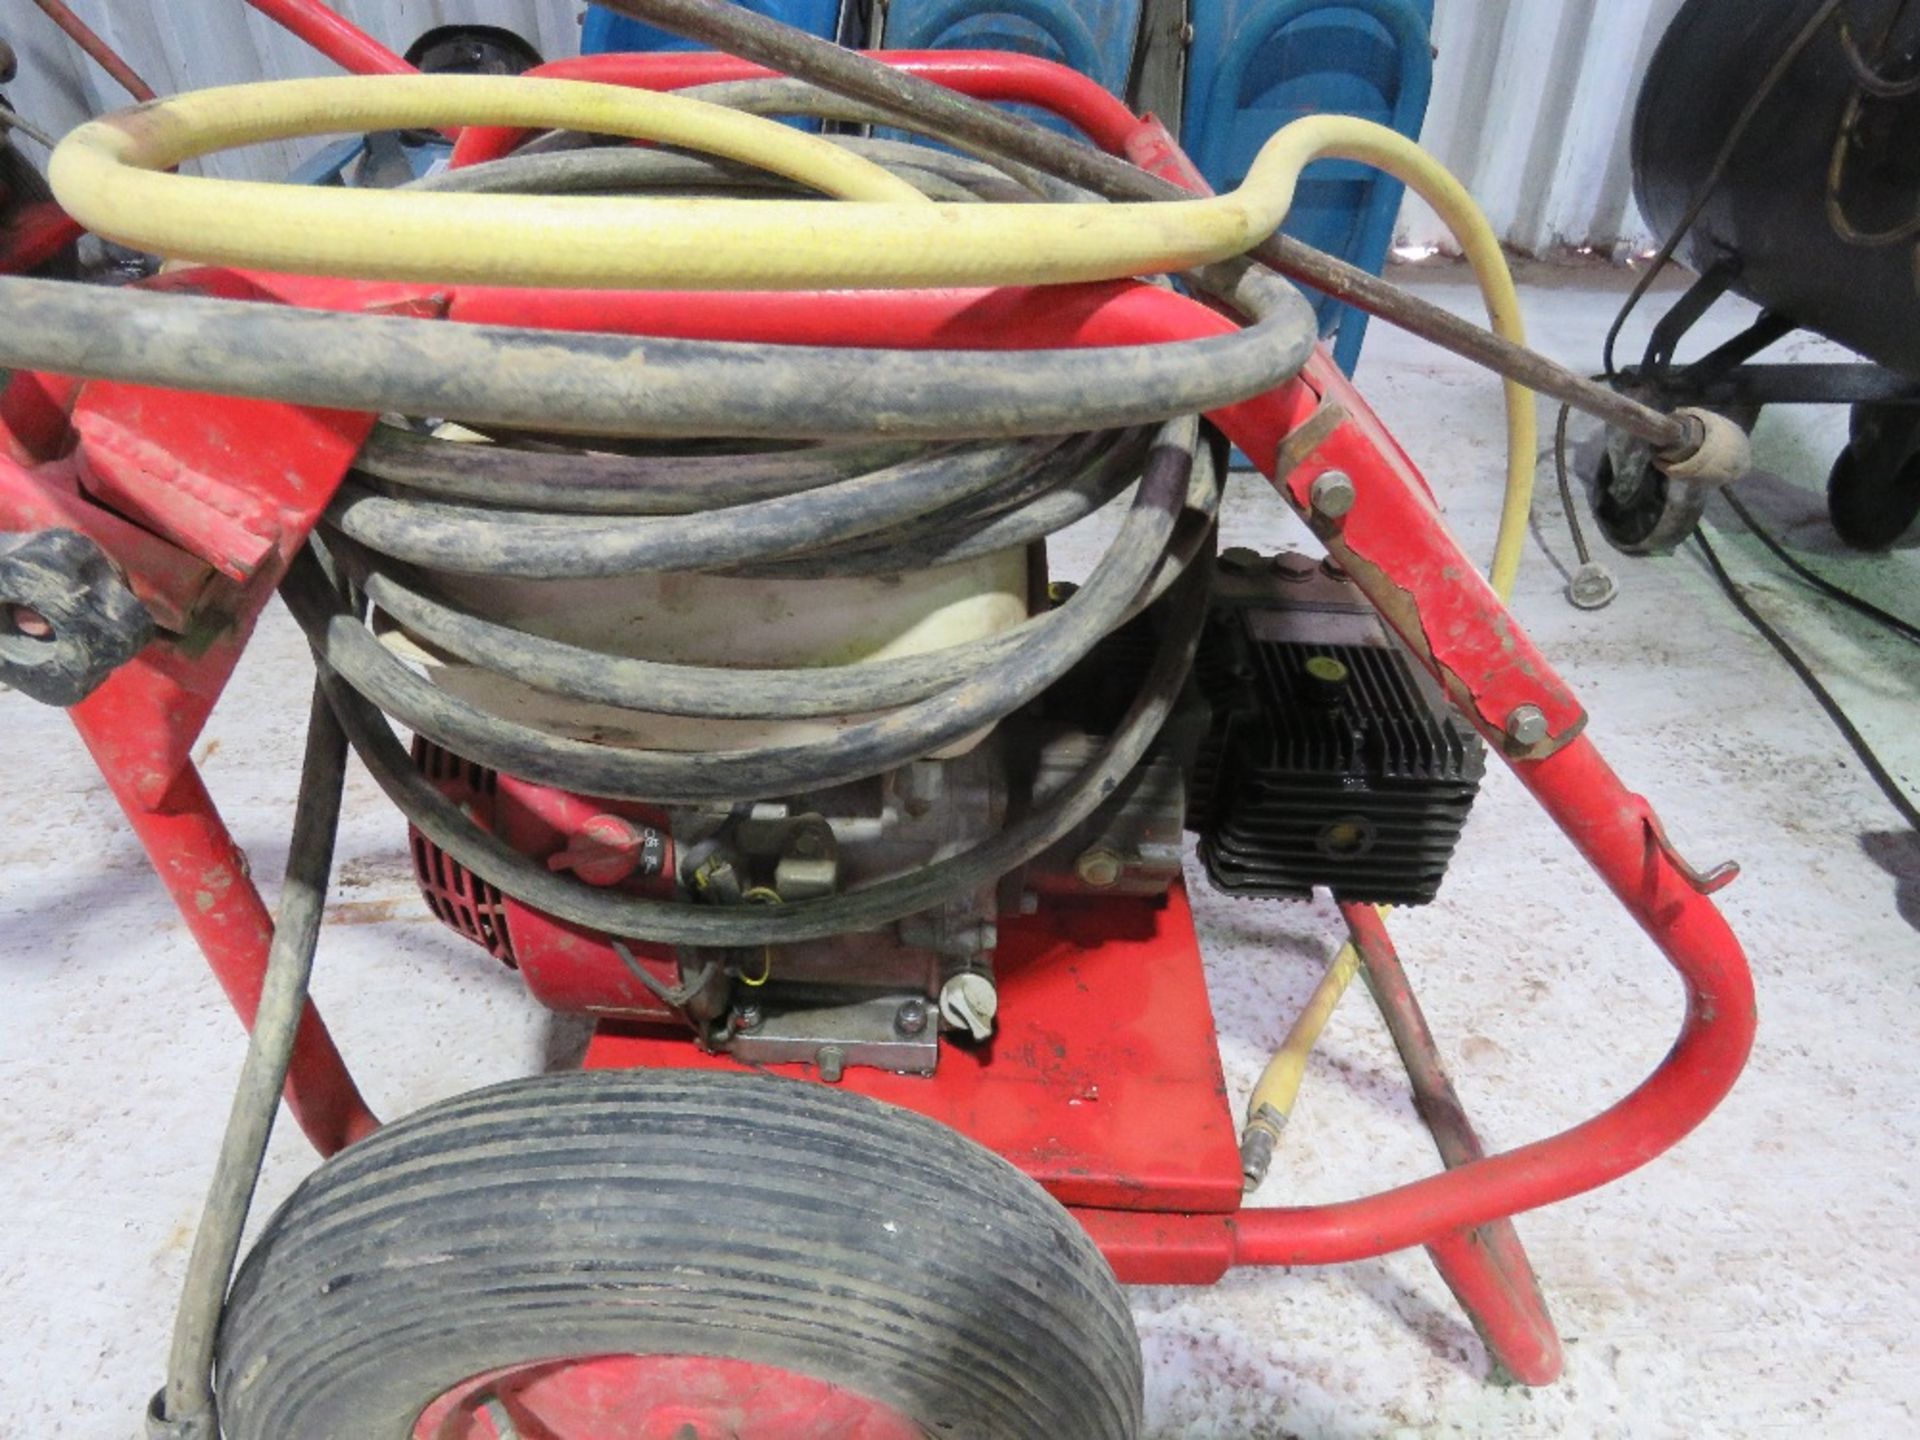 PETROL ENGINED PRESSURE WASHER WITH HOSE AND LANCE. - Image 2 of 8